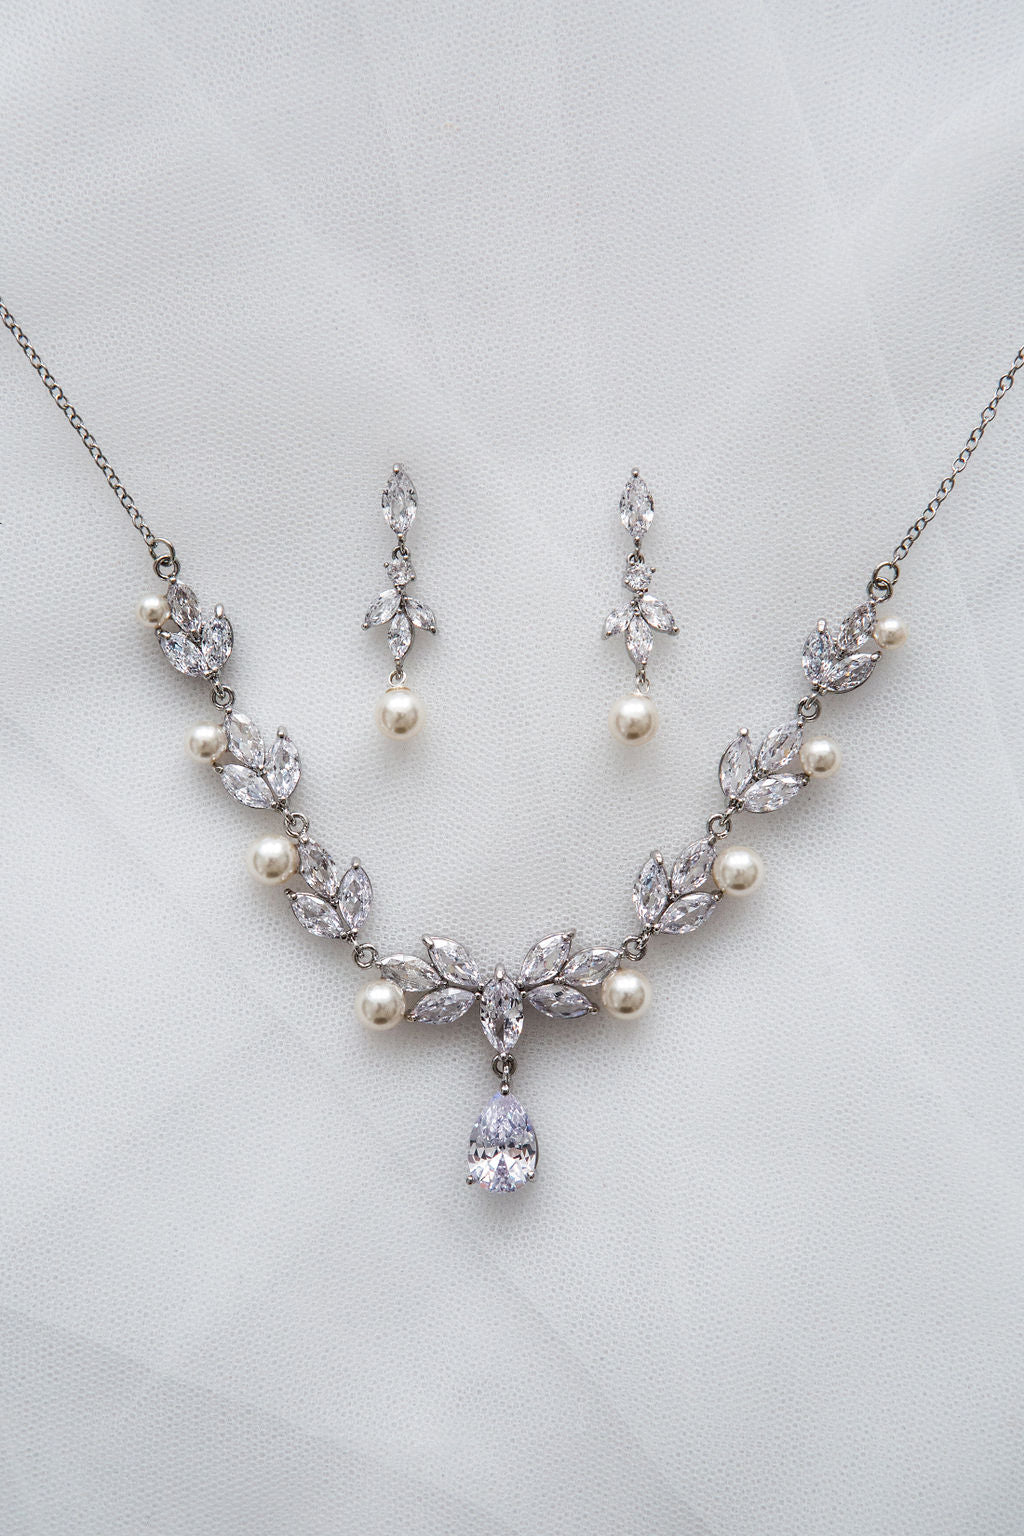 Statement Pearl Necklace Jewellery Set